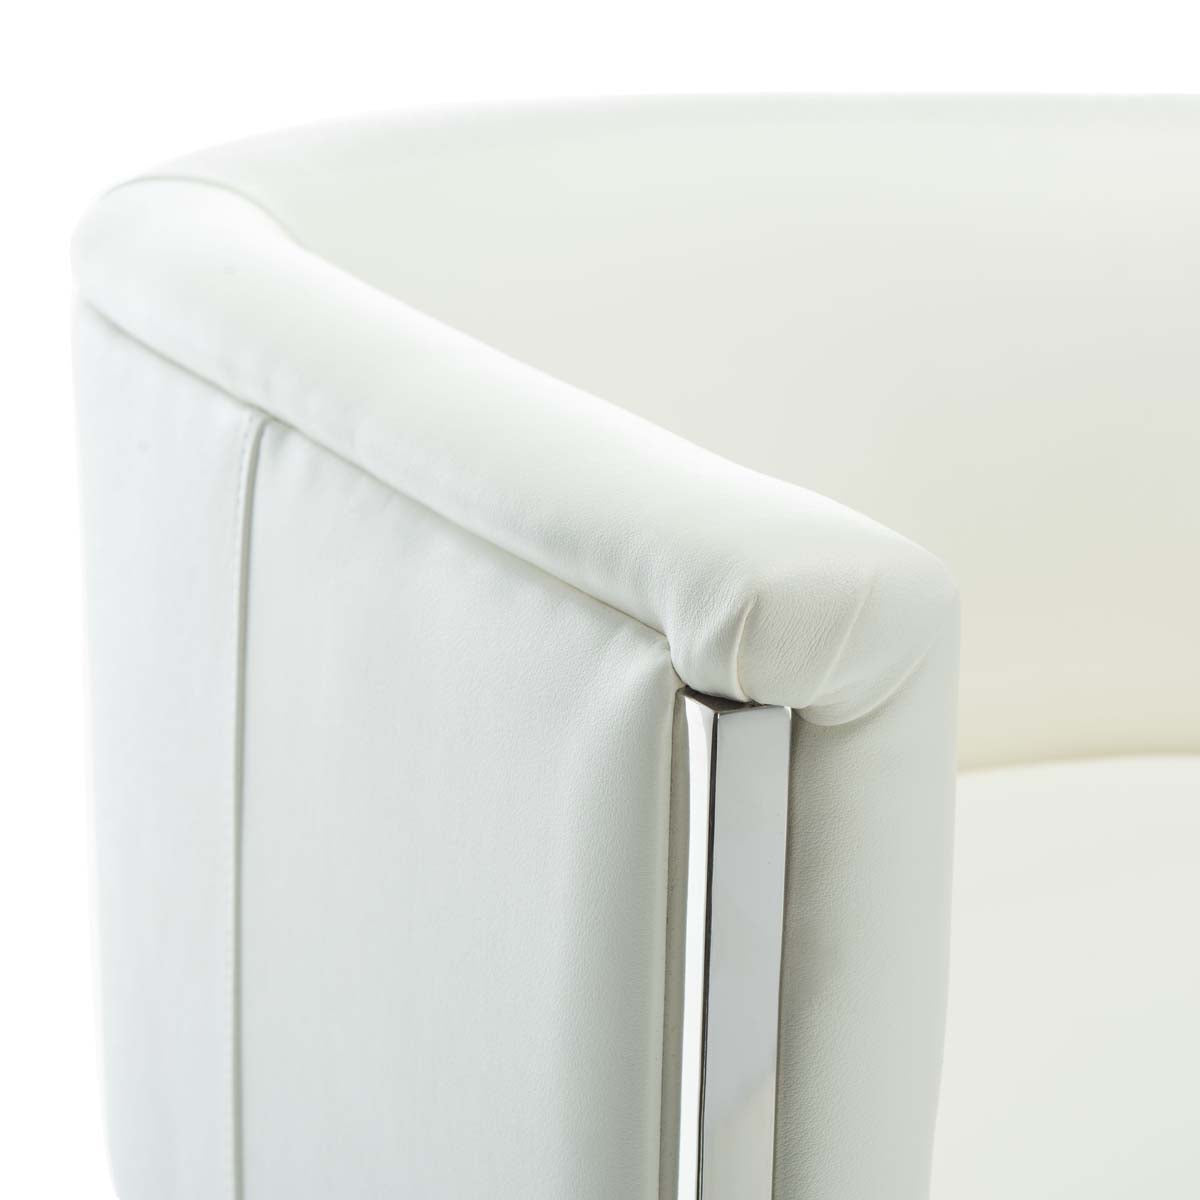 Safavieh Couture Shiloh Leather Bar Stool - Nobility White